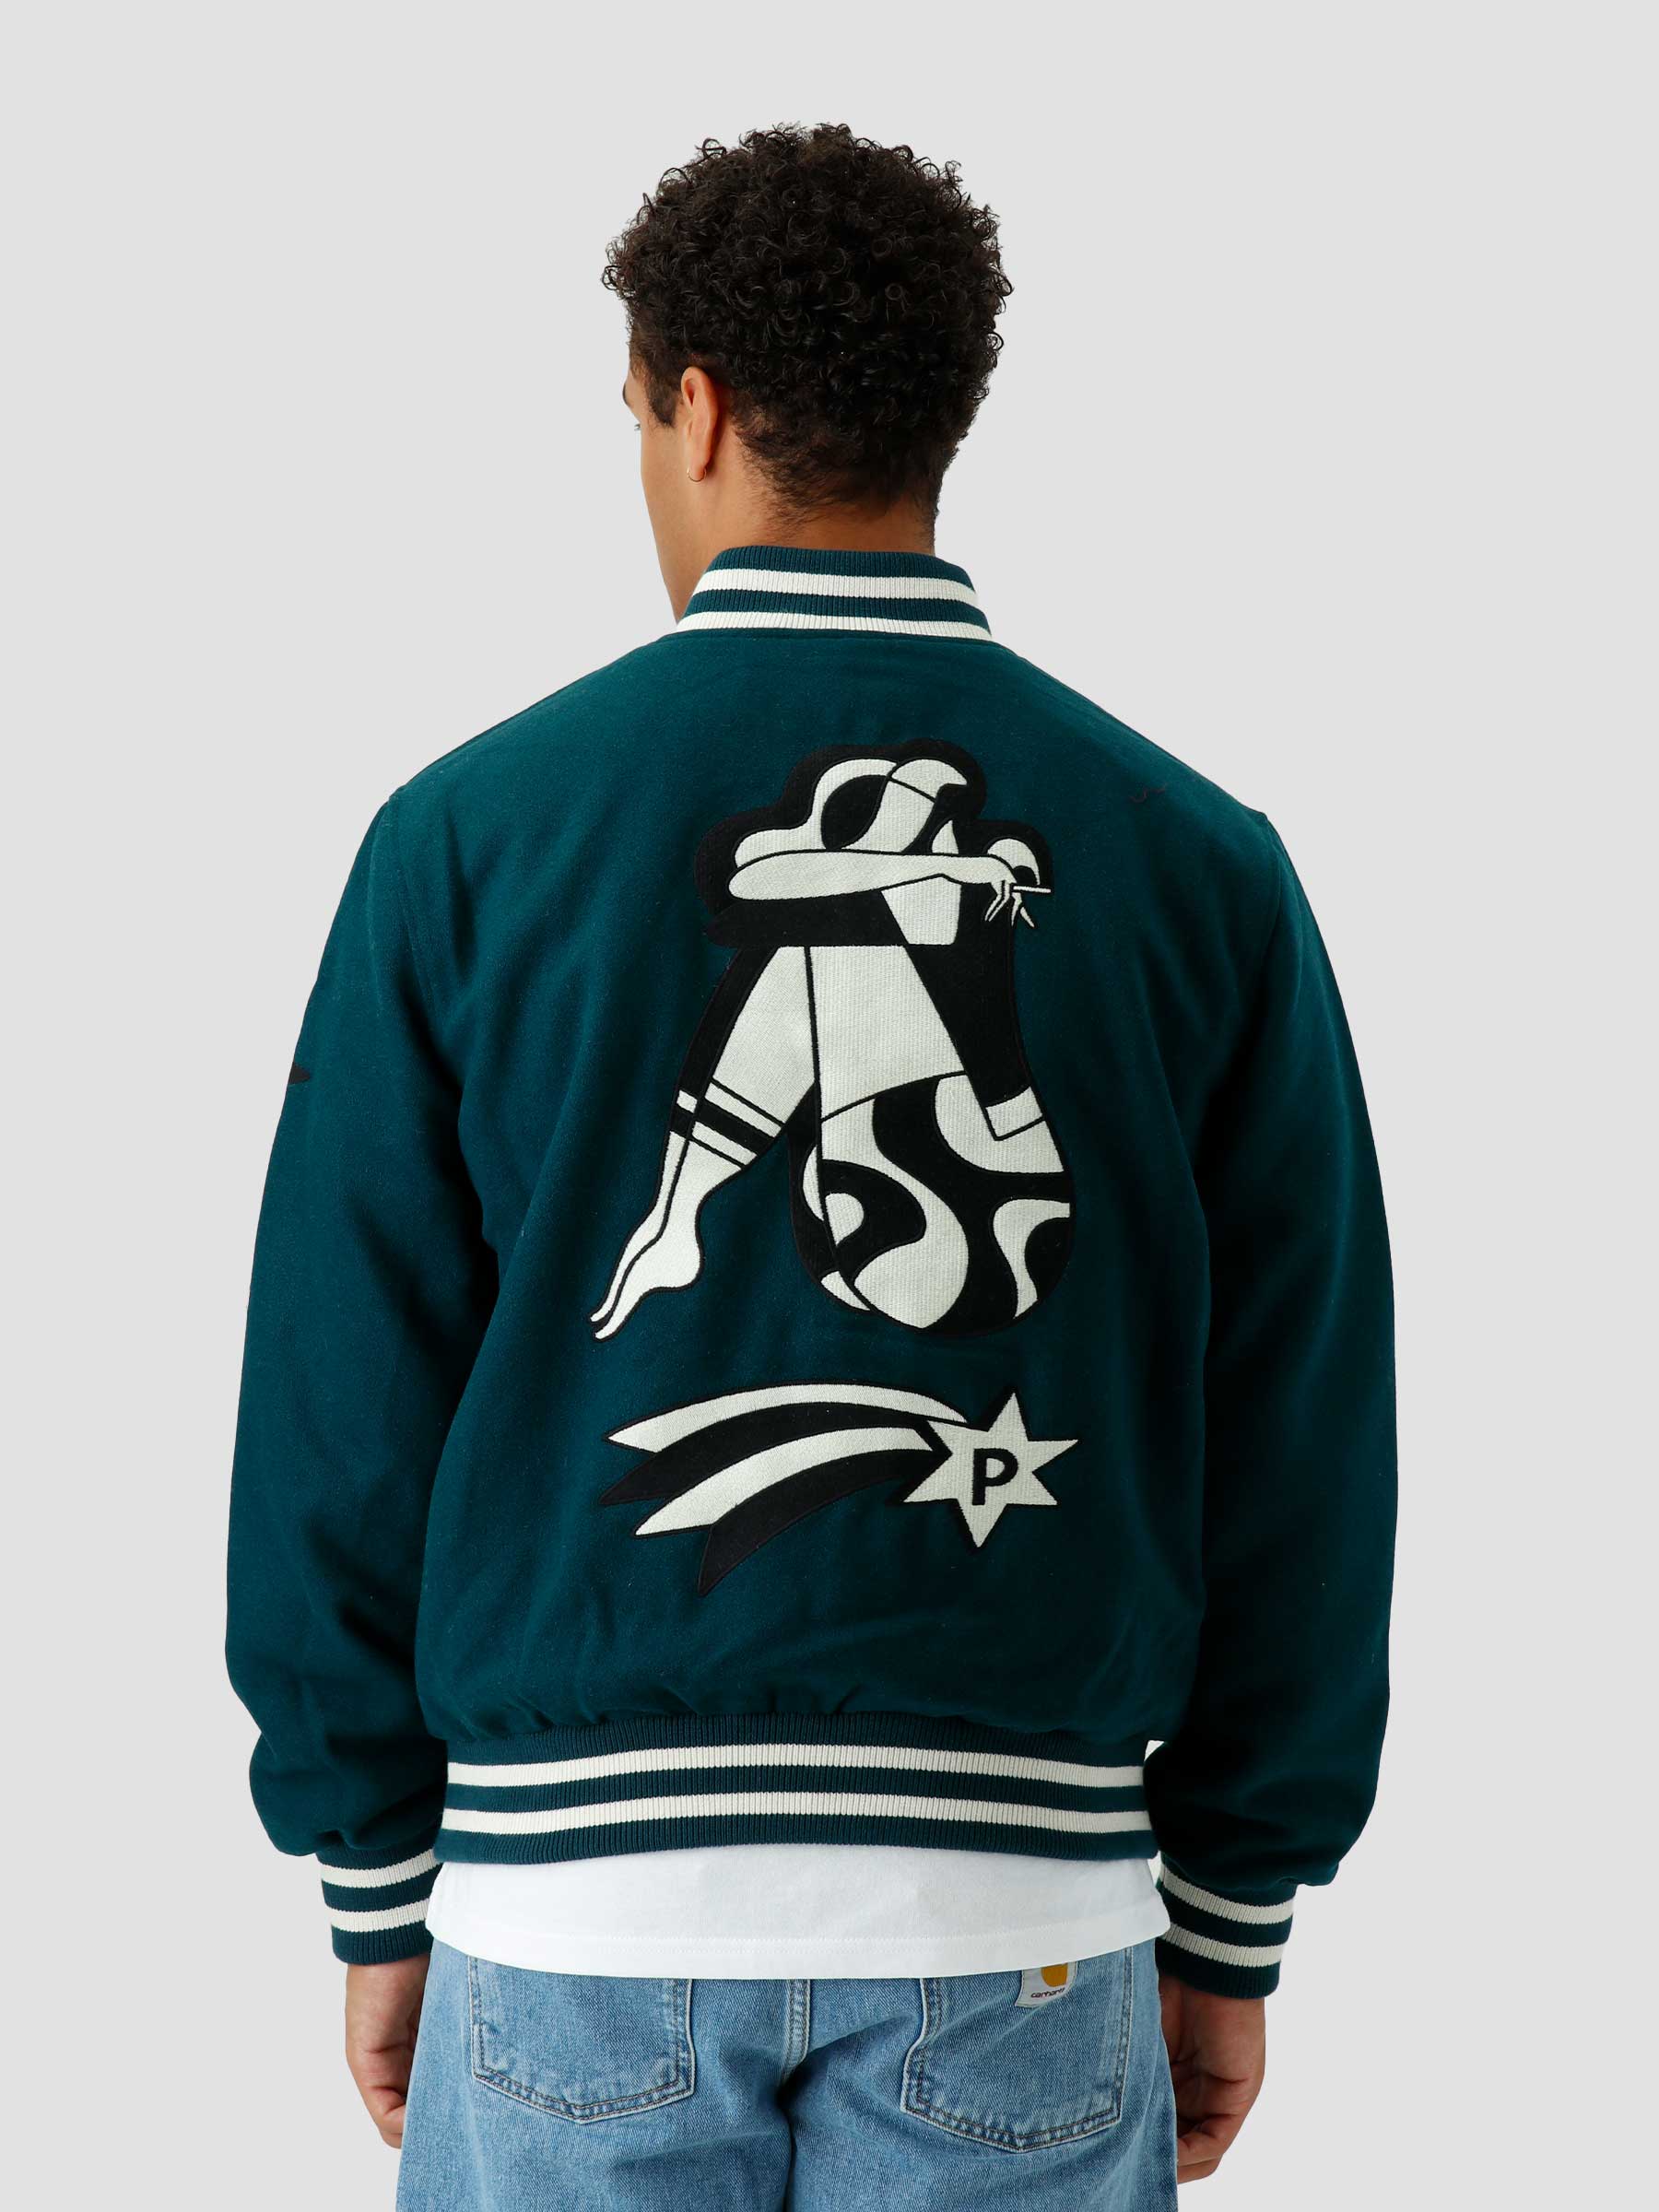 by Parra Cloudy Star Varsity Jacket Pine Green